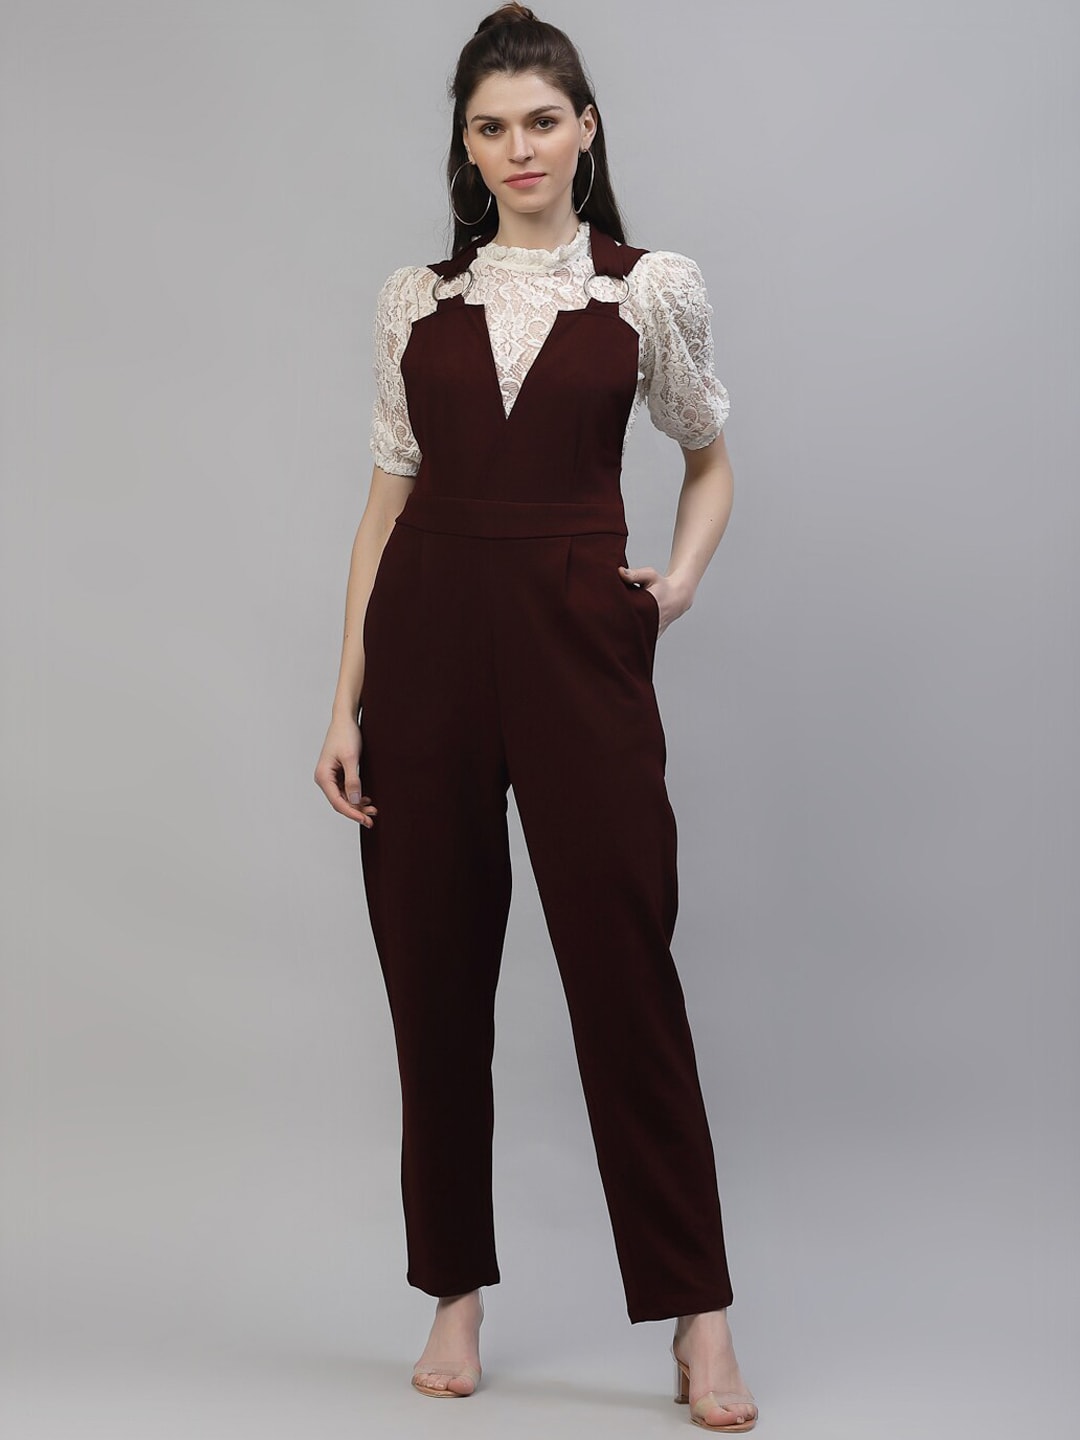 Athena Women Burgundy Solid Basic Jumpsuit Price in India